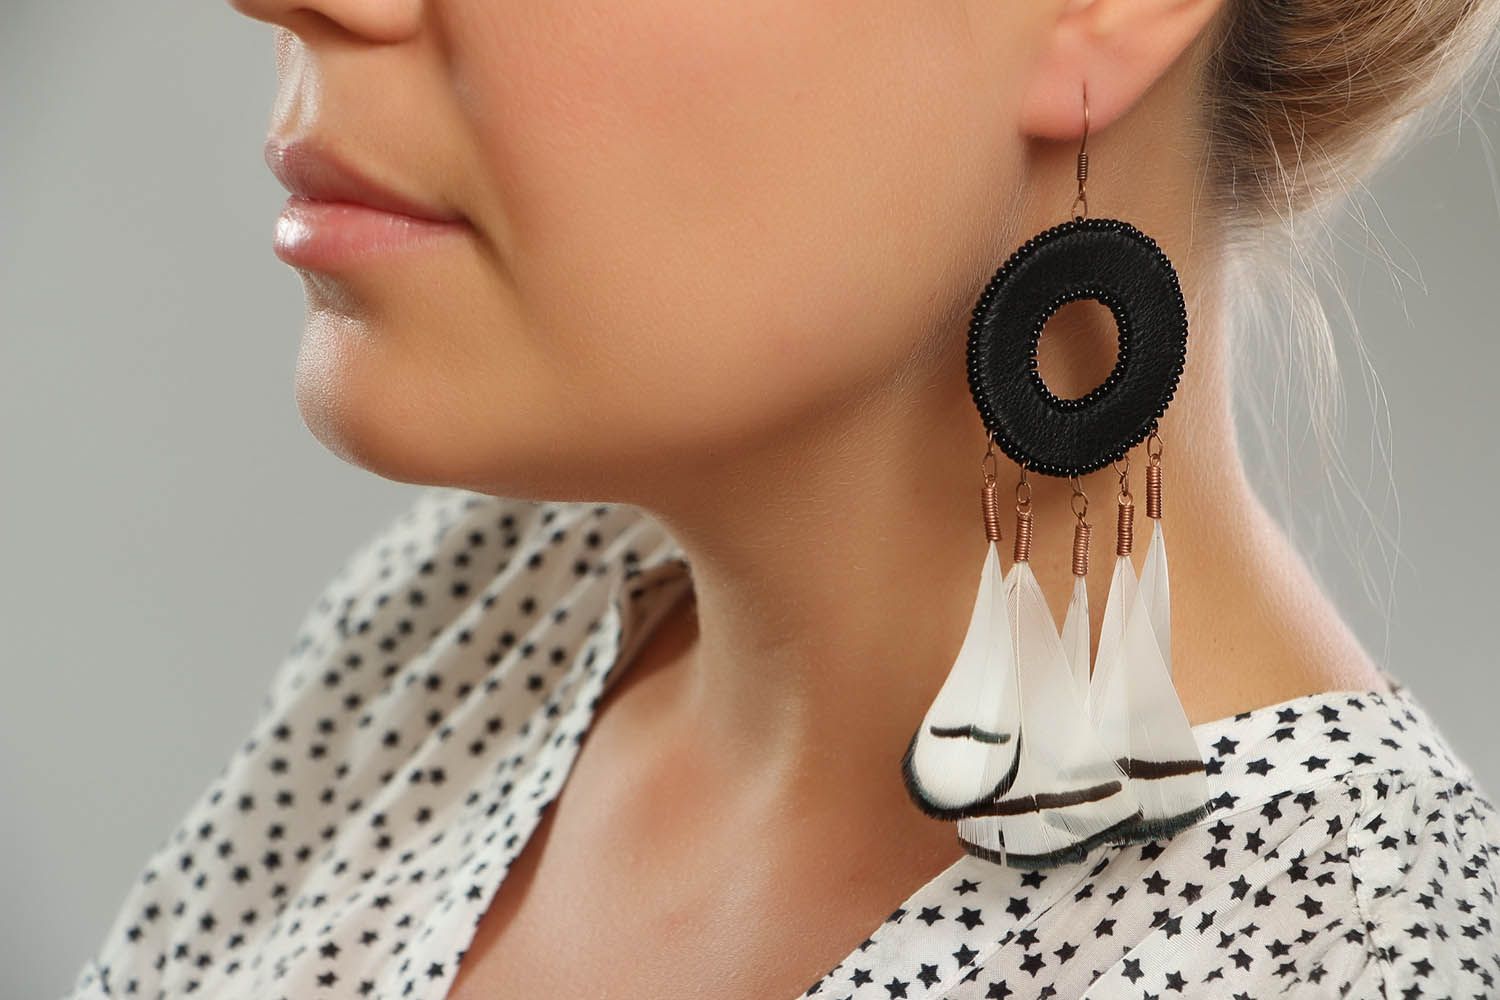 Earrings made of leather and feathers photo 4